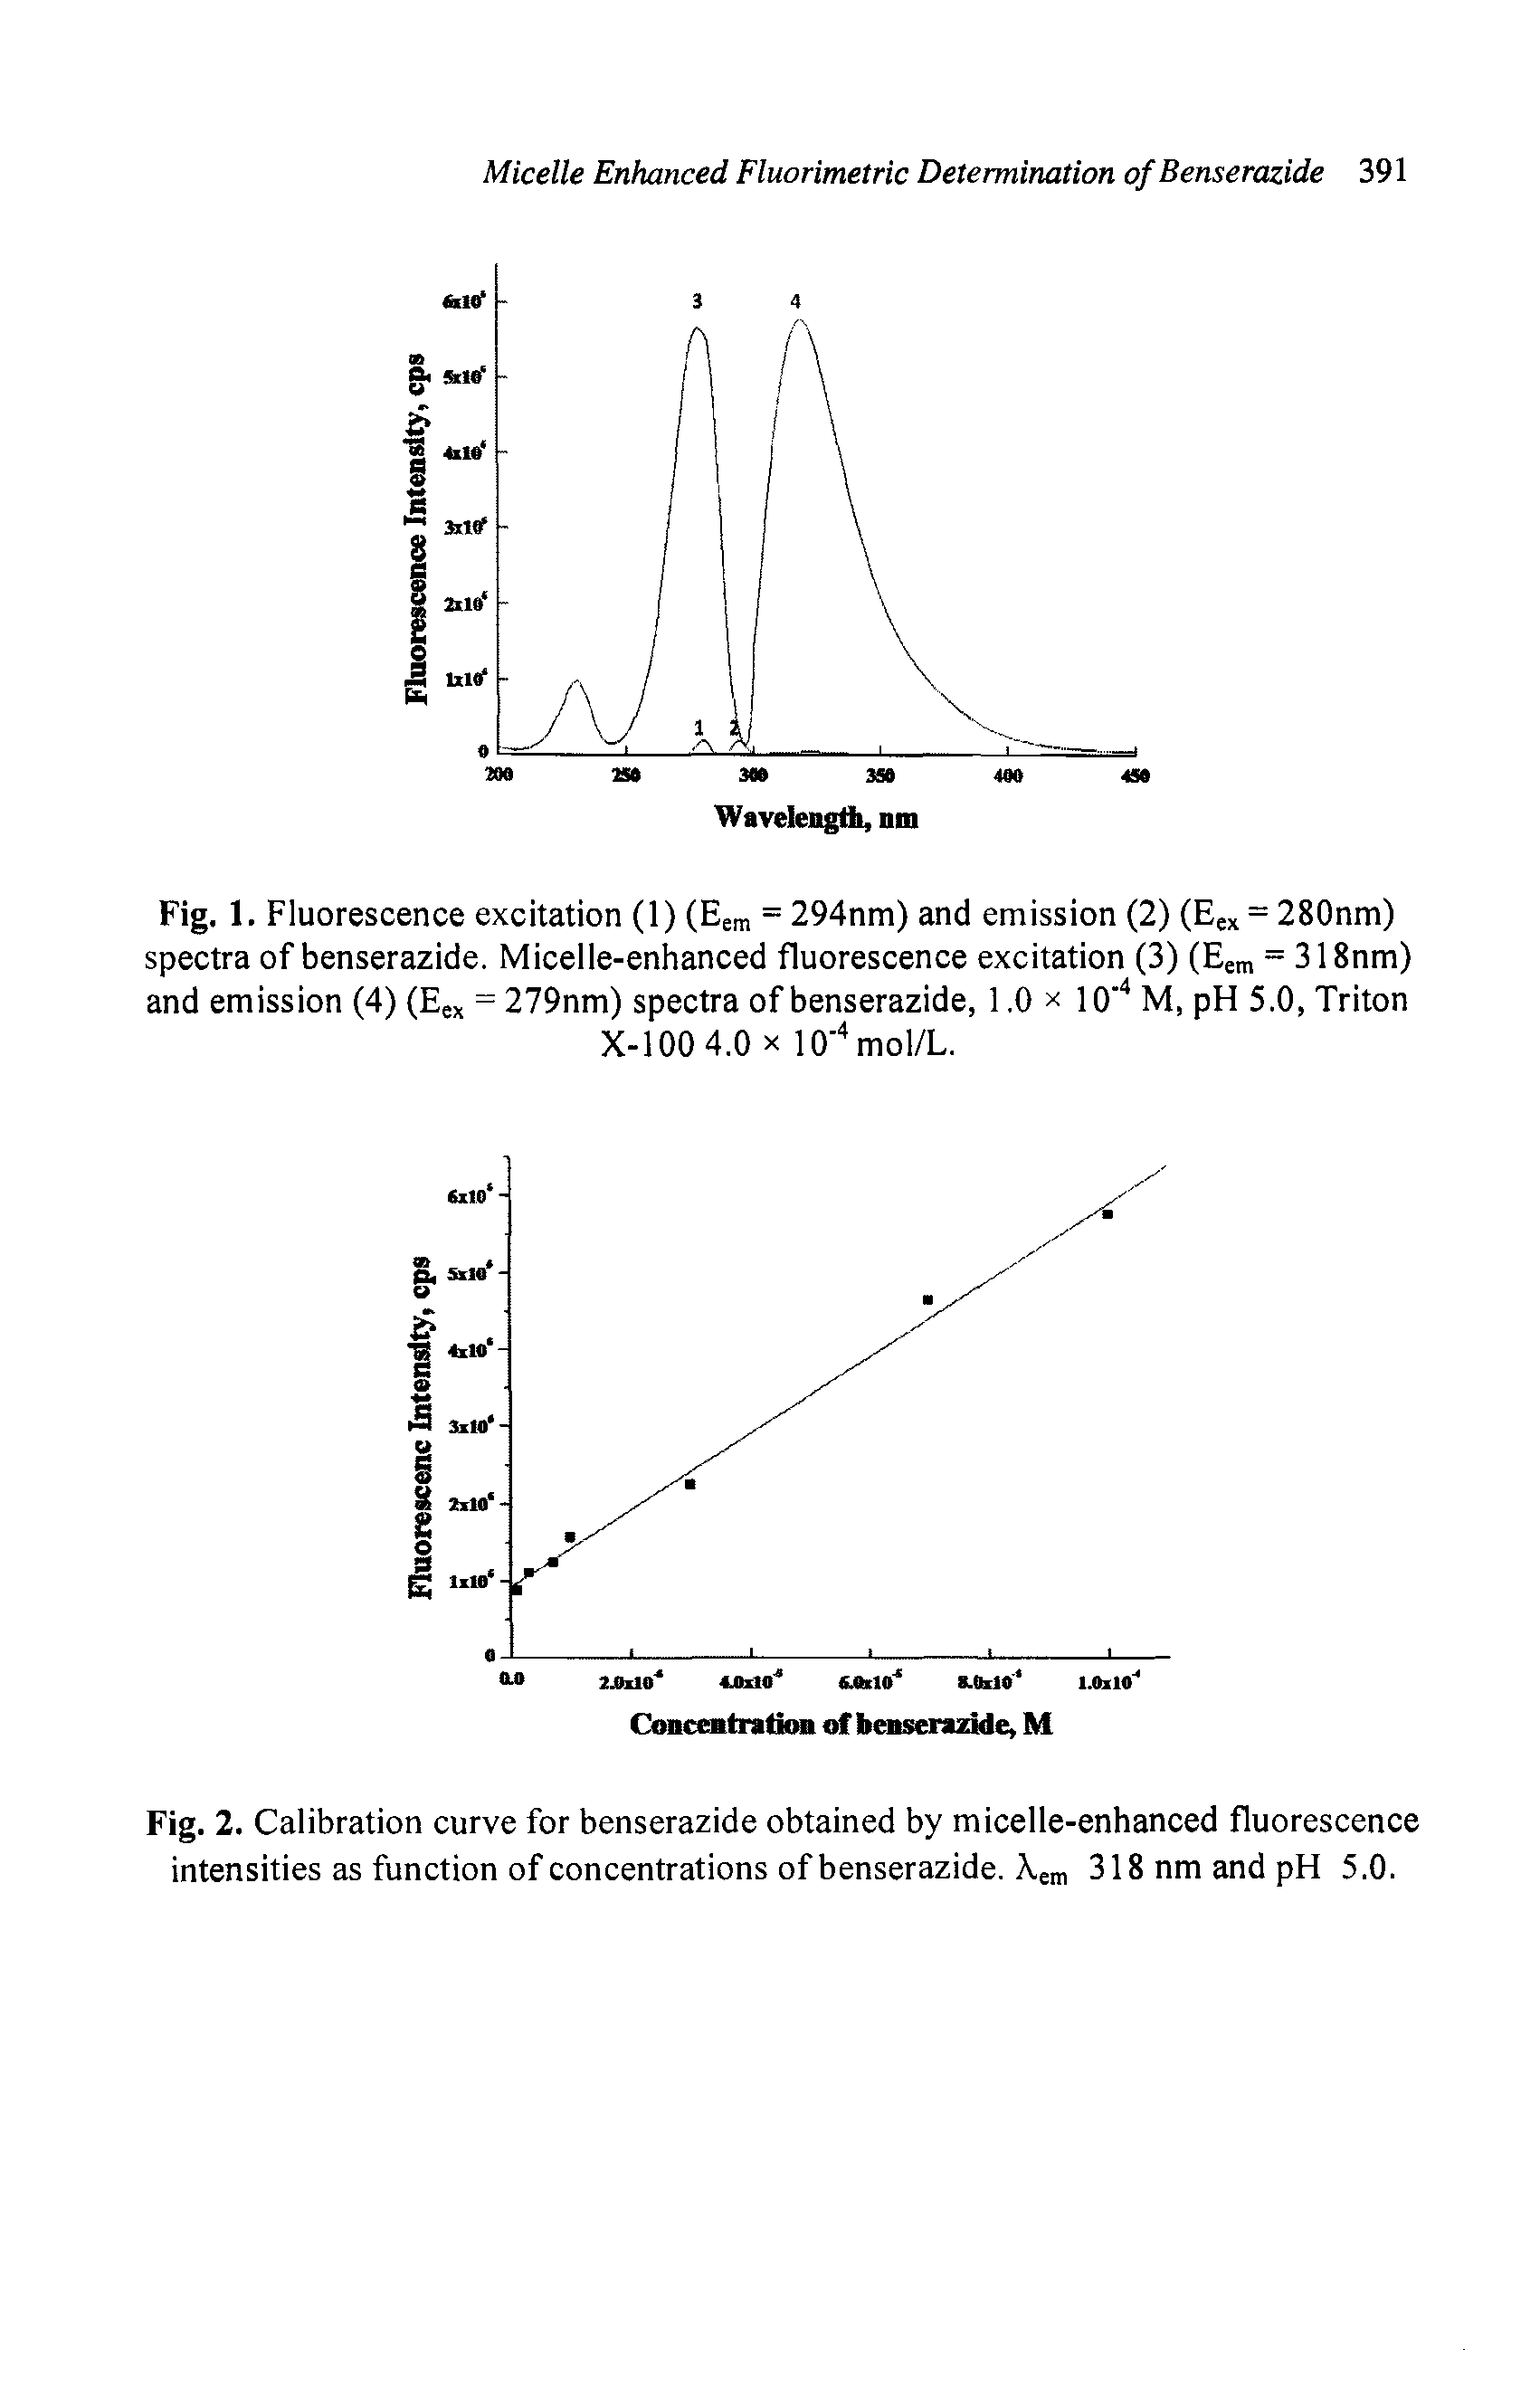 Fig. 2. Calibration curve for benserazide obtained by micelle-enhanced fluorescence intensities as function of concentrations of benserazide. Aem 318 nm and pH 5.0.